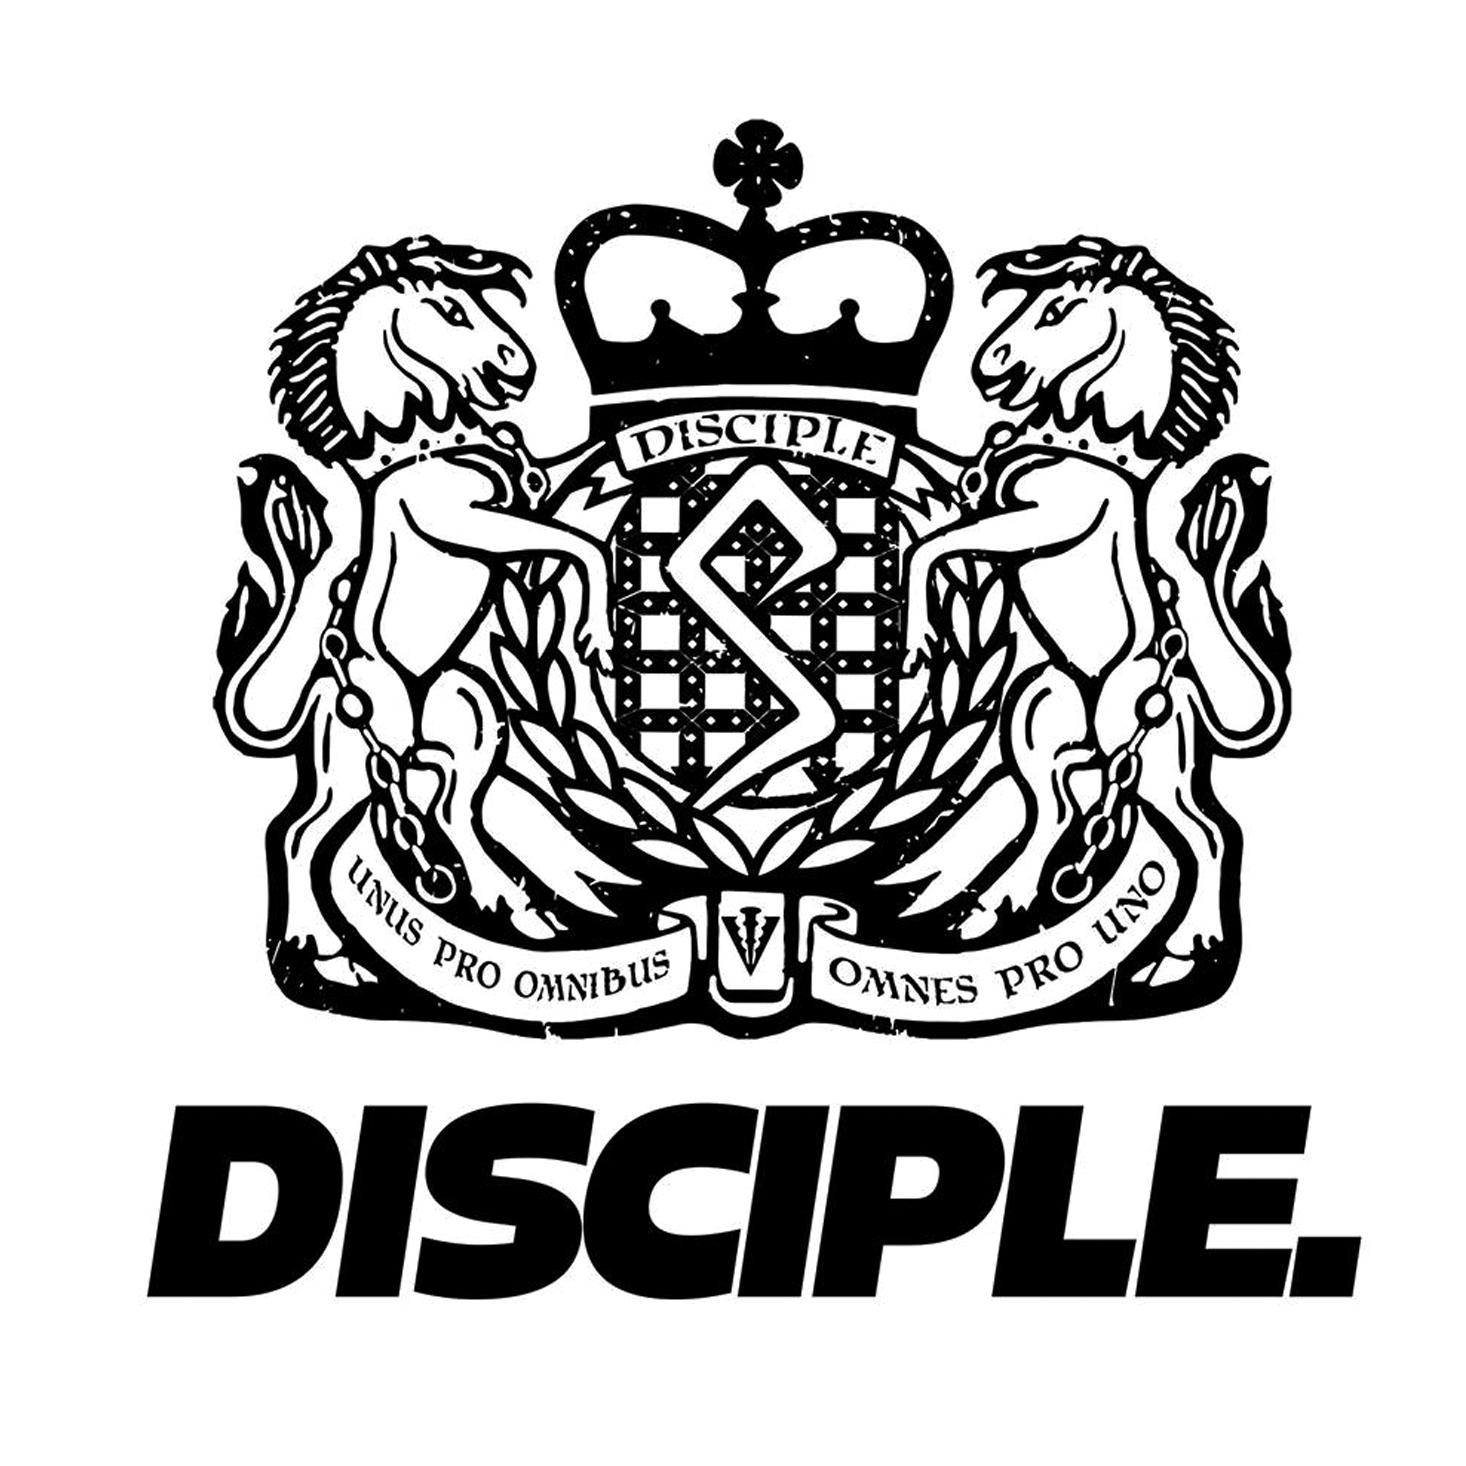 Disciple Dubstep Logo - MB Artists Artists Agency offers an exciting artist roster